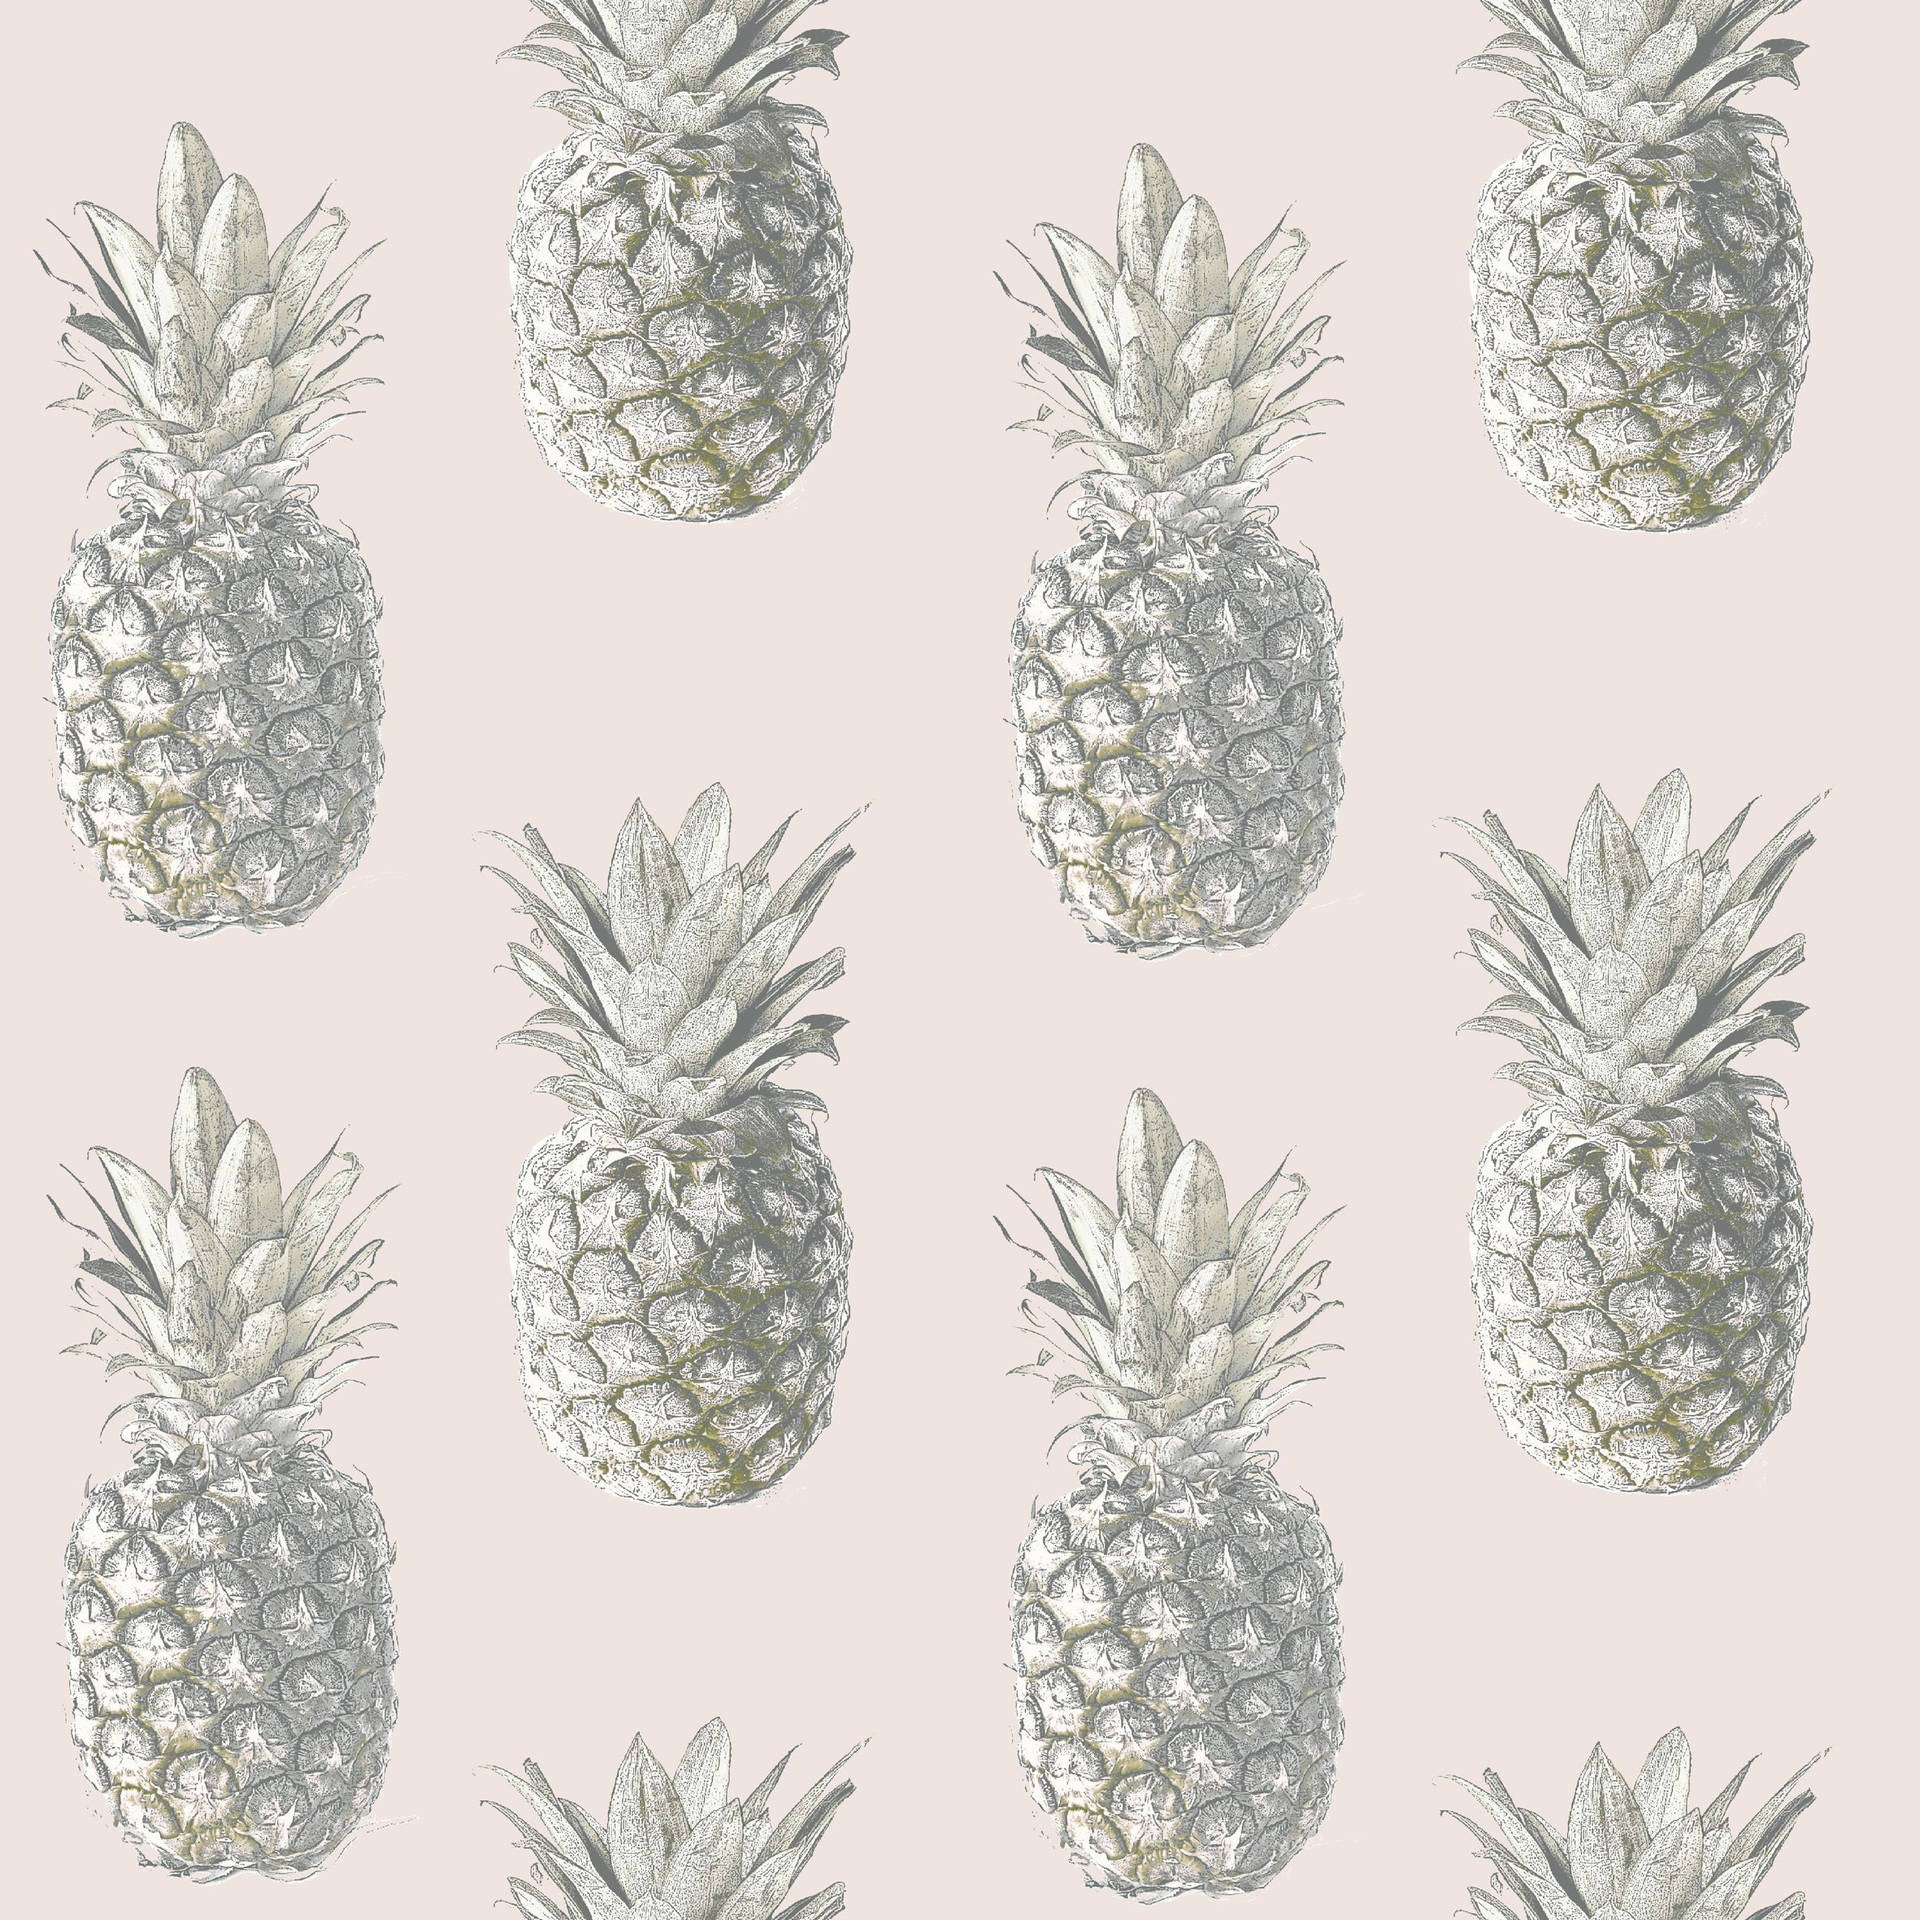 Pineapple 2362X2362 Wallpaper and Background Image